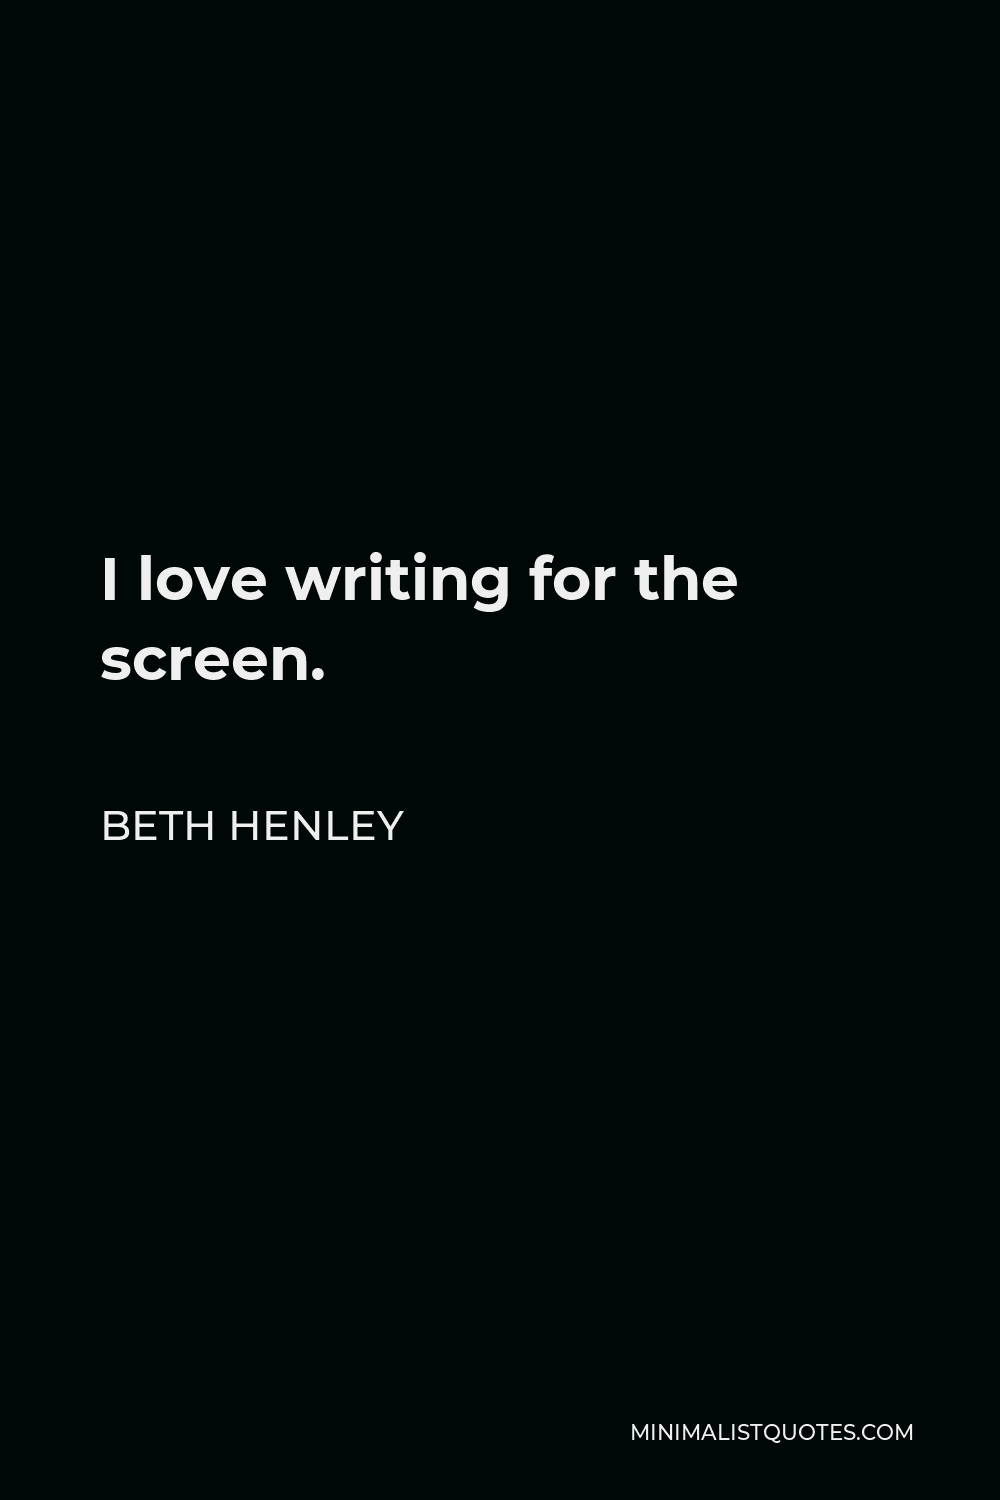 Beth Henley Quote - I love writing for the screen.